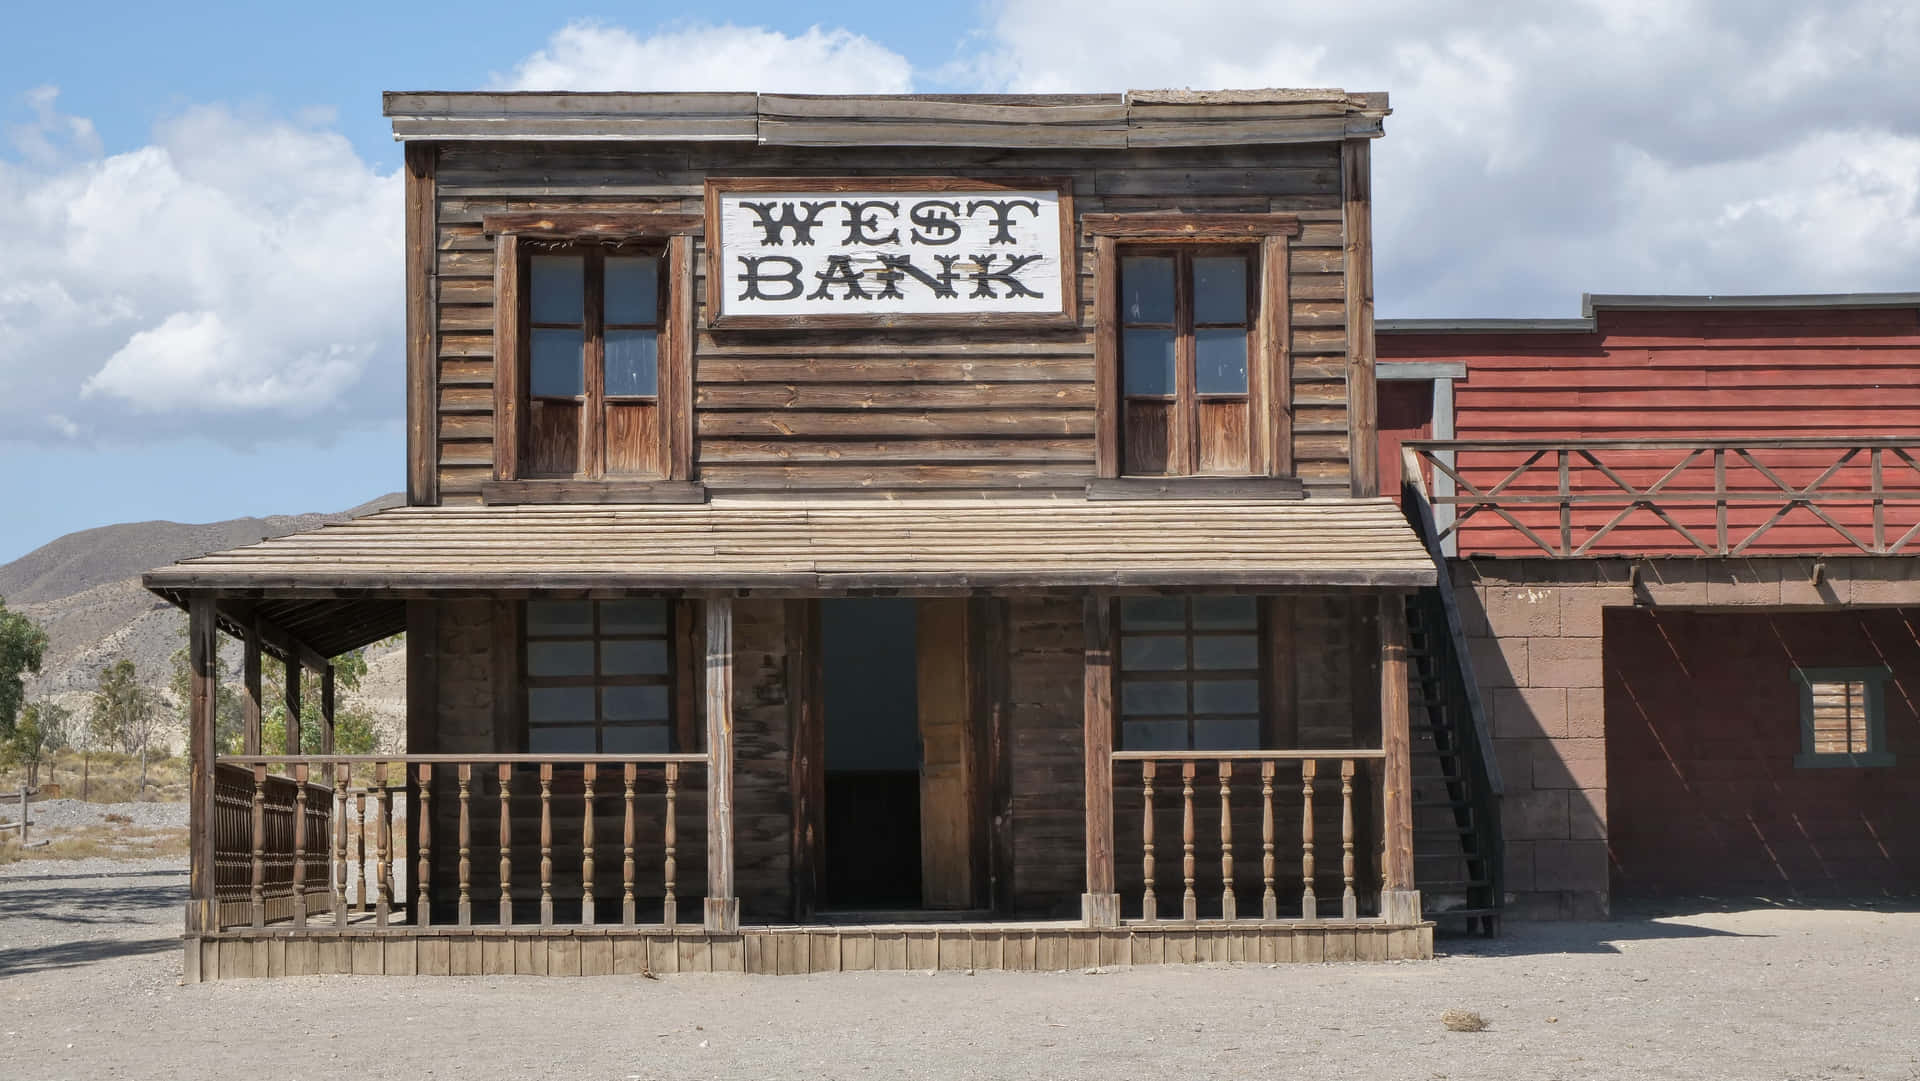 Saddle up for an adventurous ride of the Old West!